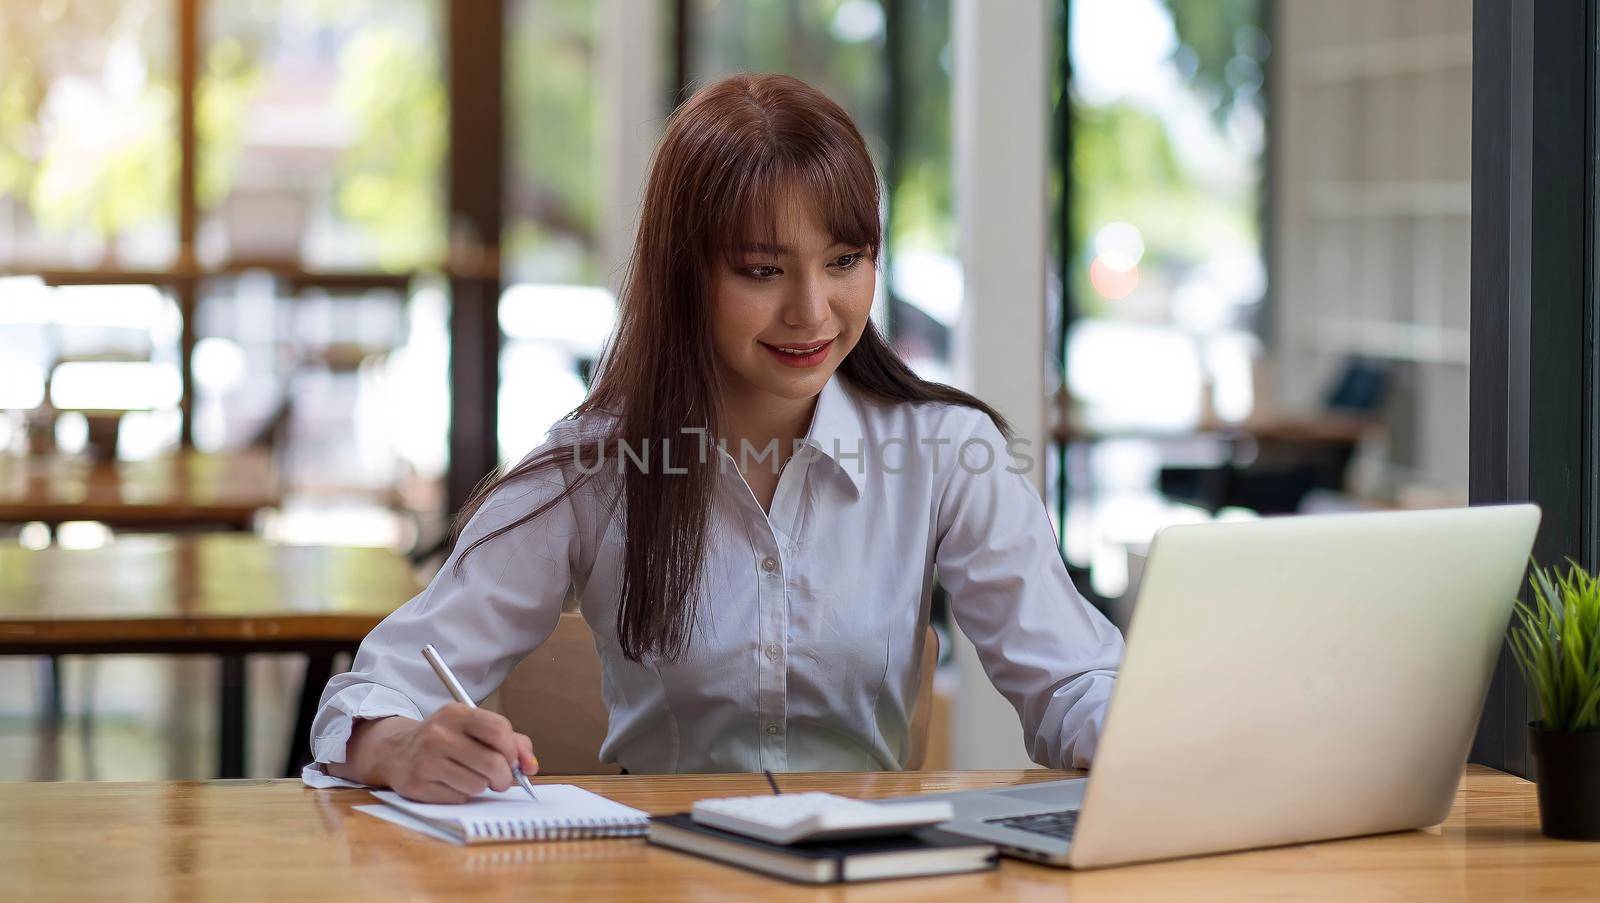 A young, cheerful girl in a white shirt smiles, smiling toothily writing down notes holding training for students to be executives at laptop desktop table